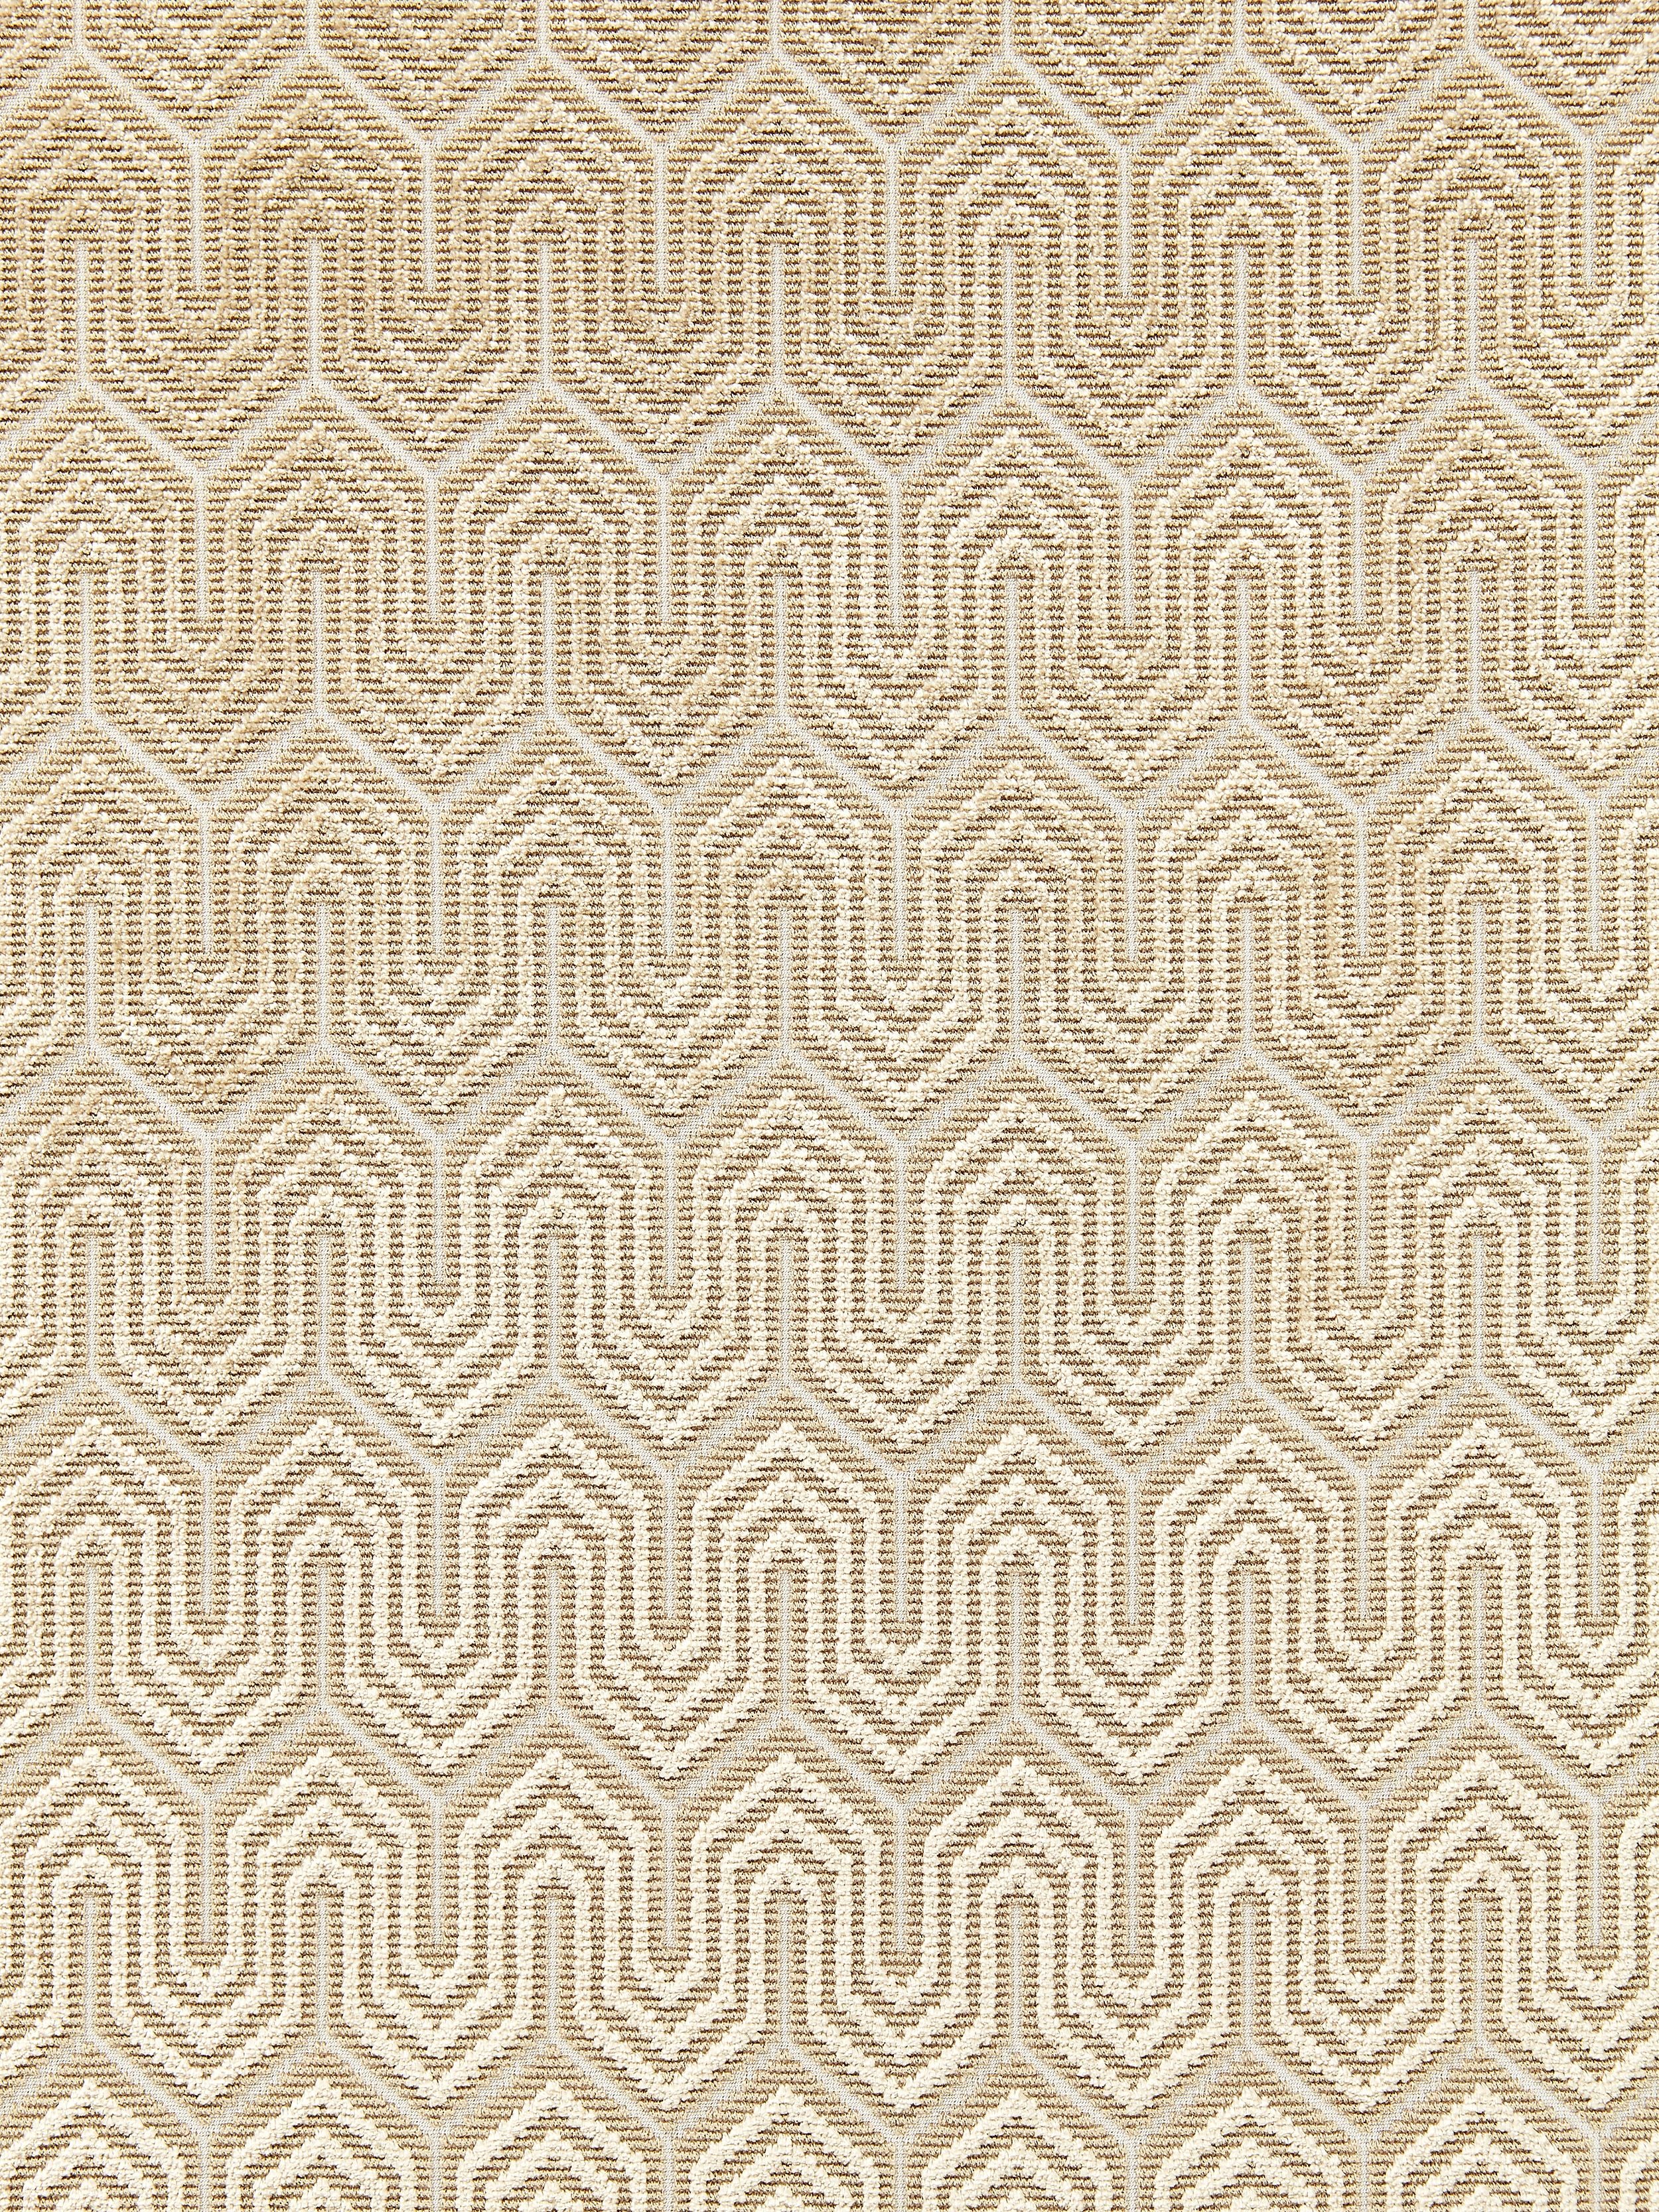 Undulation fabric in fawn color - pattern number SC 000127129 - by Scalamandre in the Scalamandre Fabrics Book 1 collection